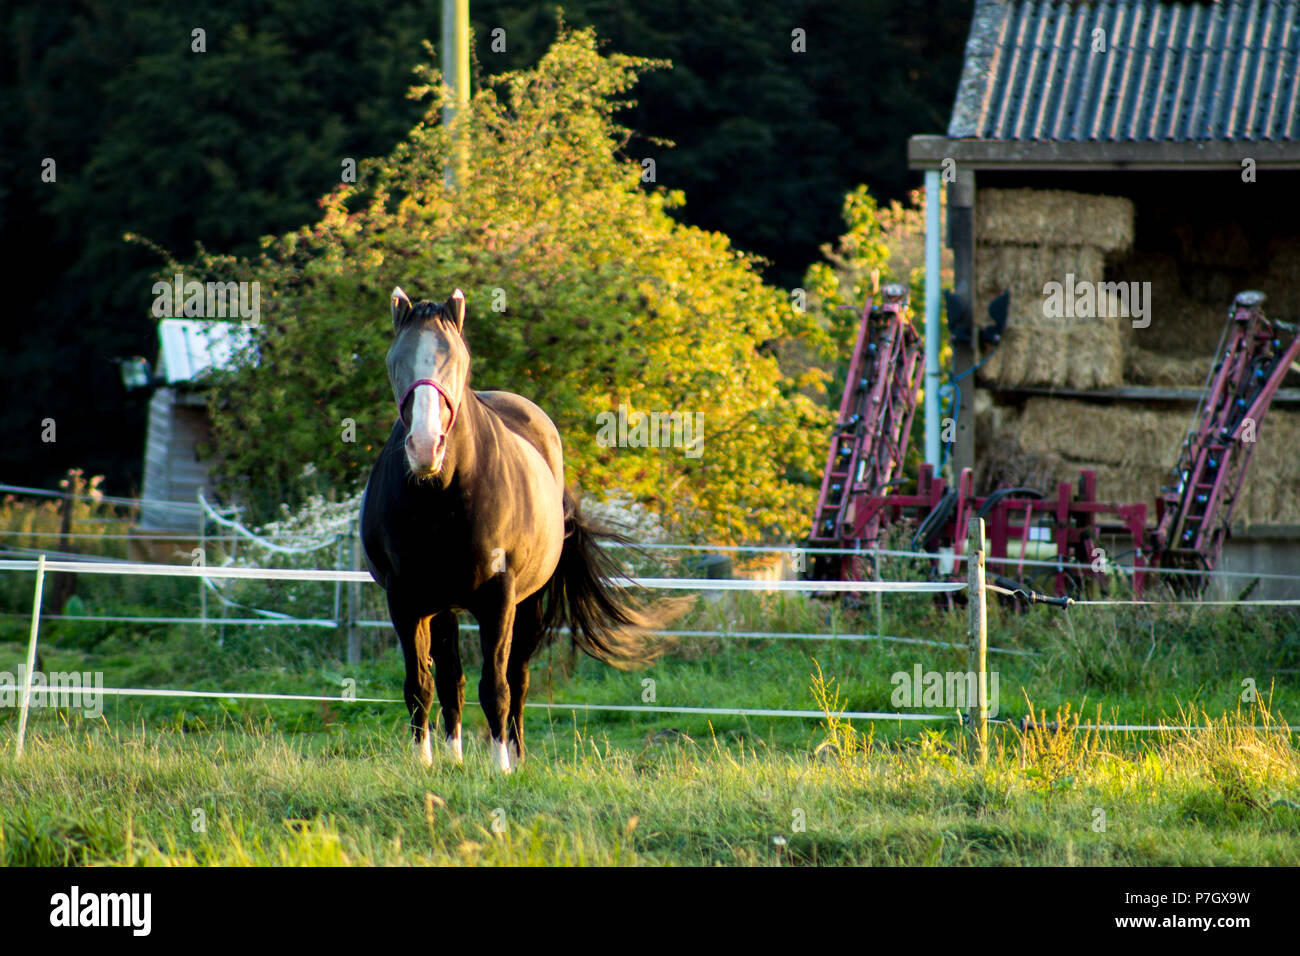 Black horse on a green field at sunset surrounded by green trees during summer / autumn Stock Photo